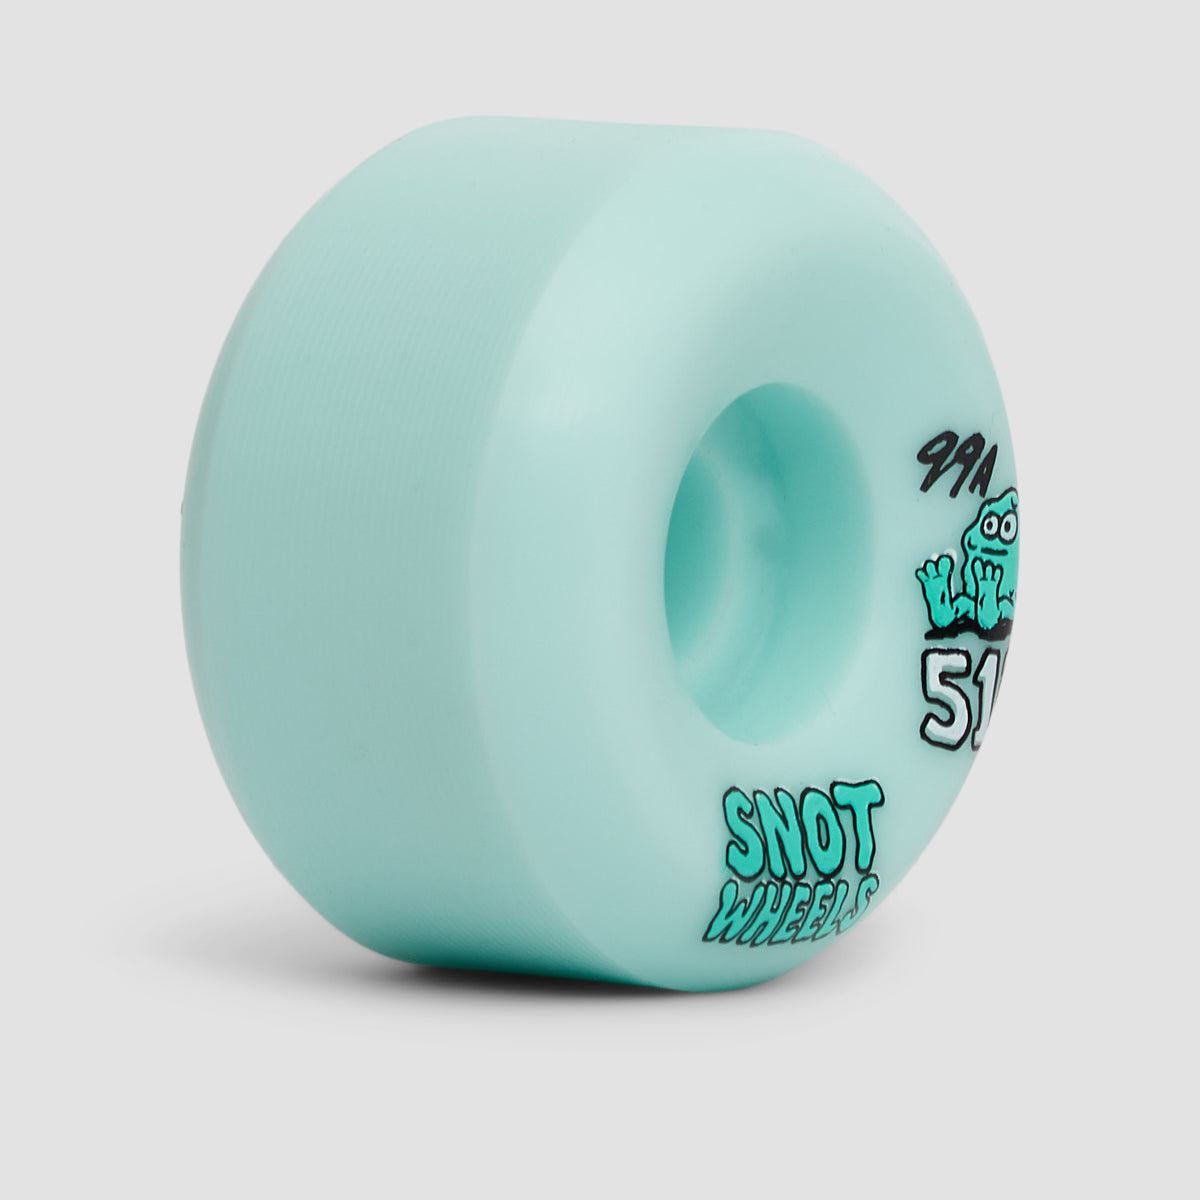 Snot Team 99A Conical Skateboard Wheels Pale Teal 51mm